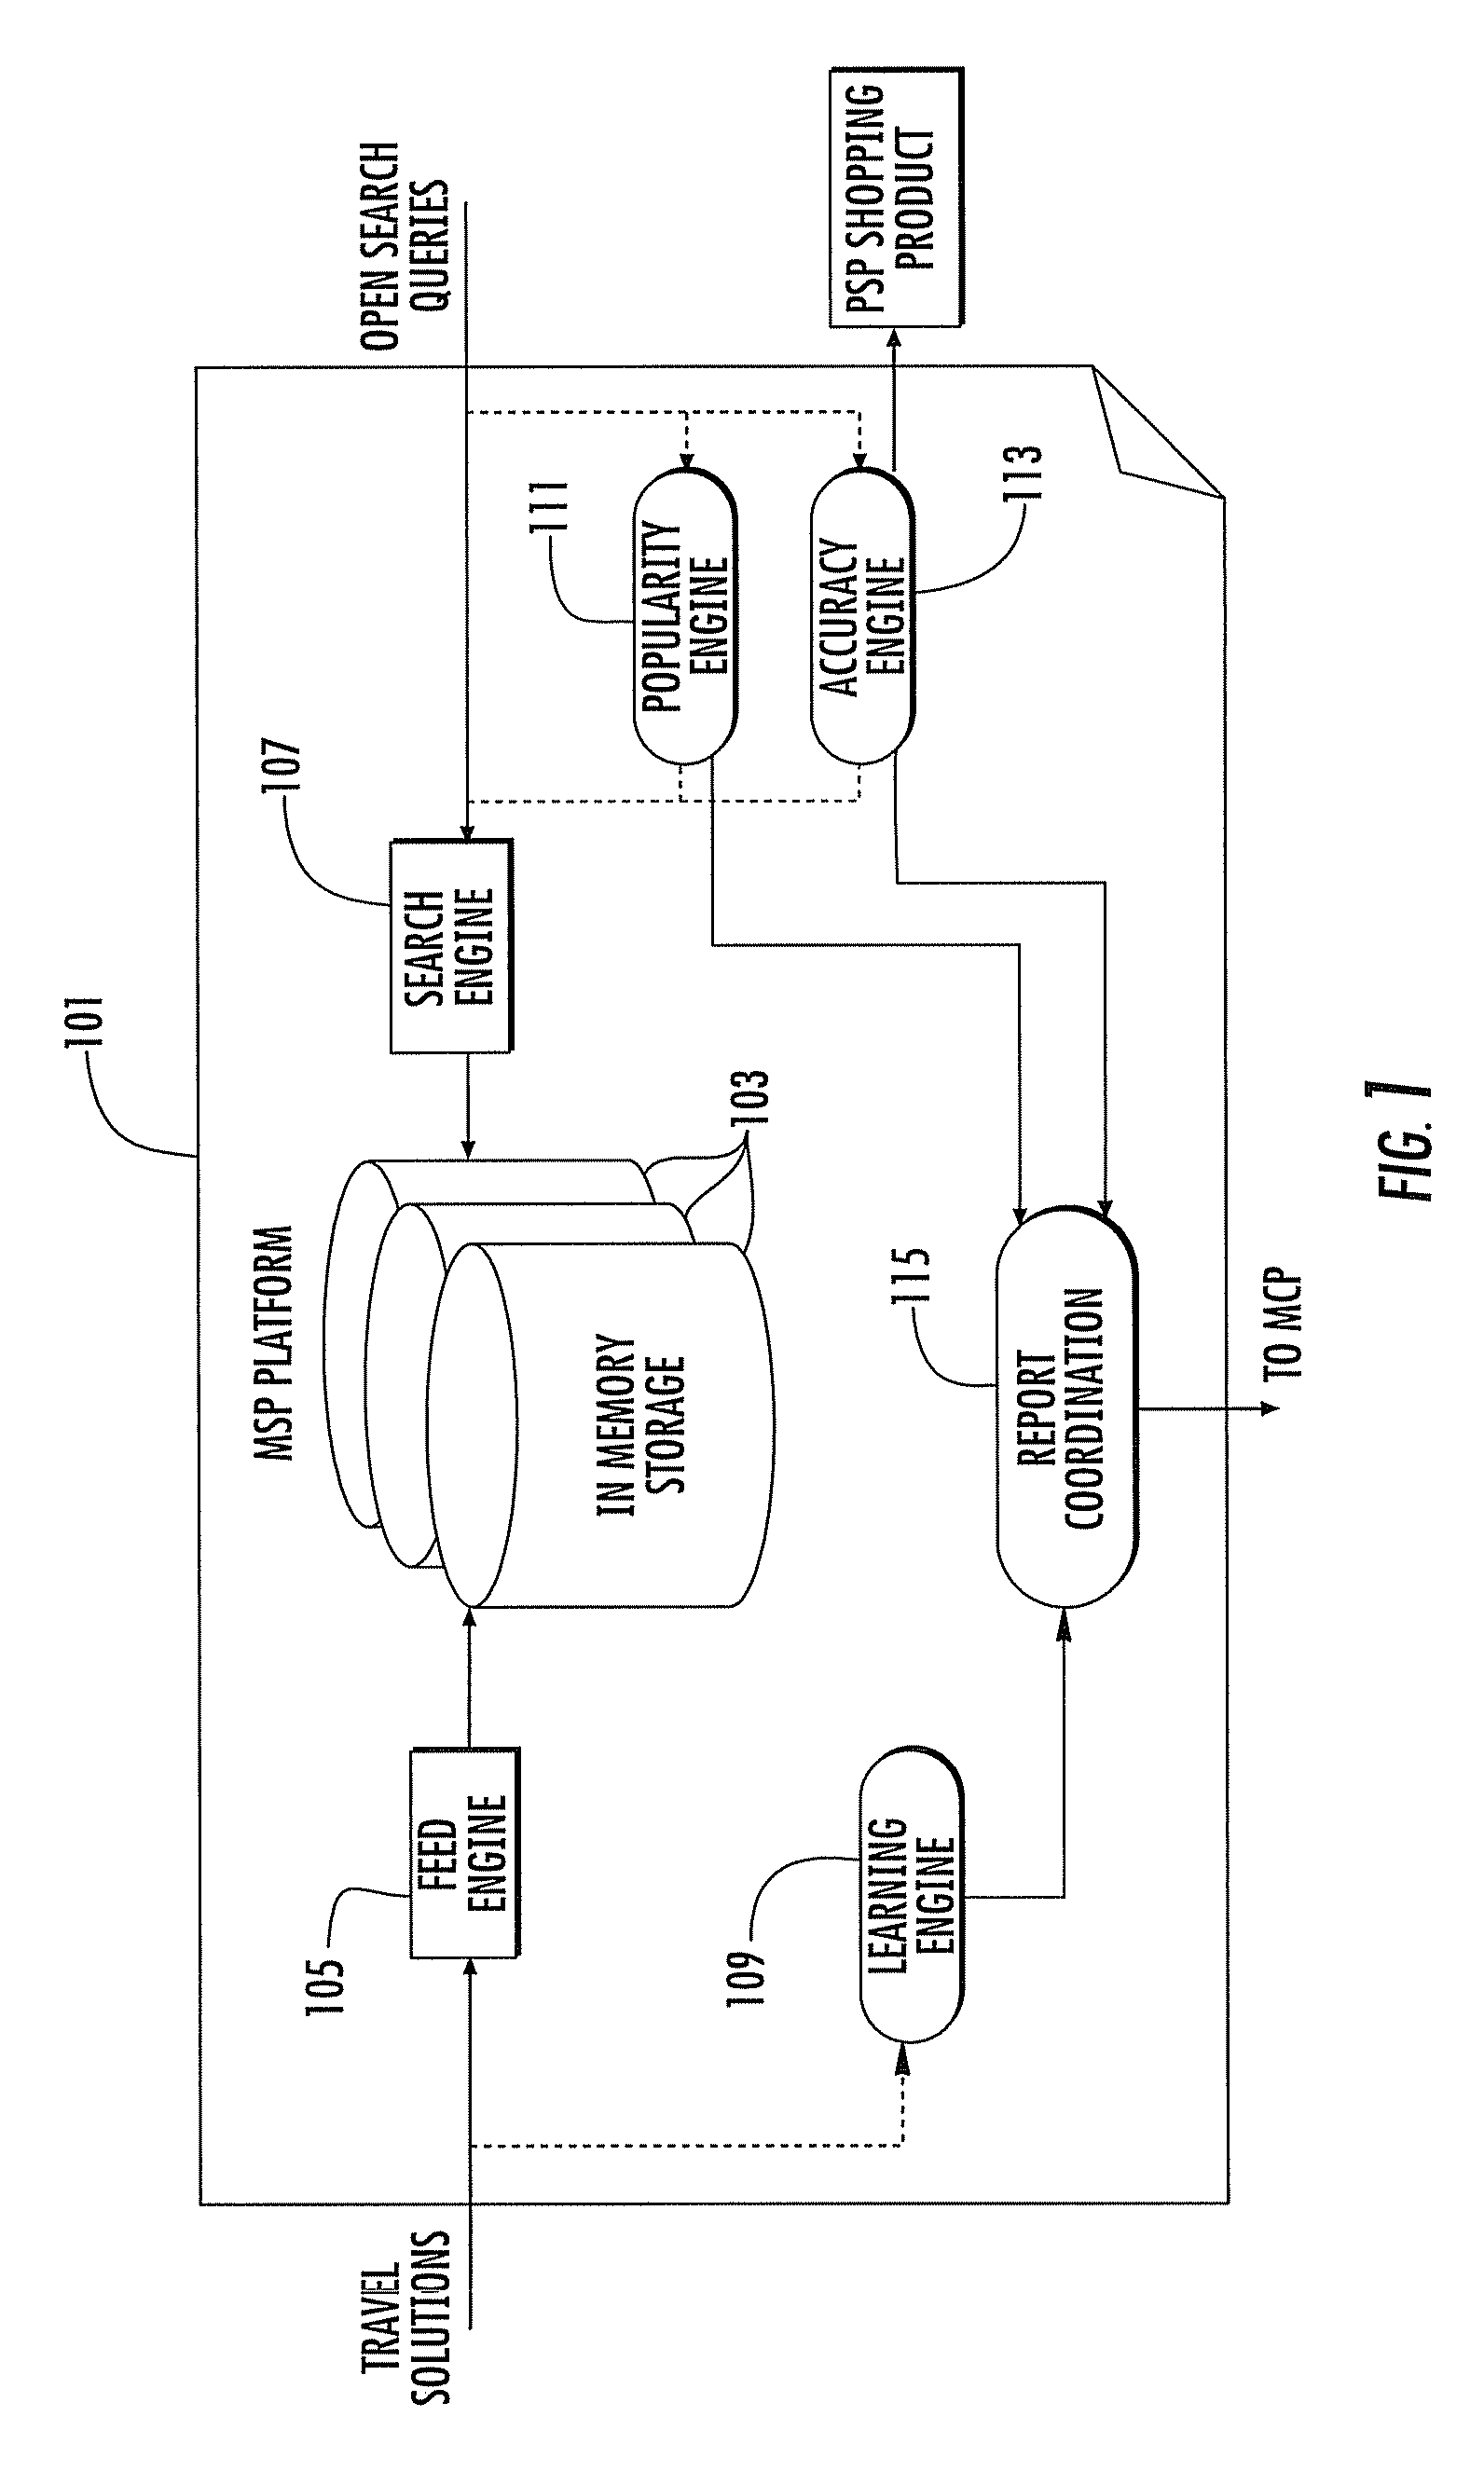 Method and system for a pre-shopping reservation system with increased search efficiency